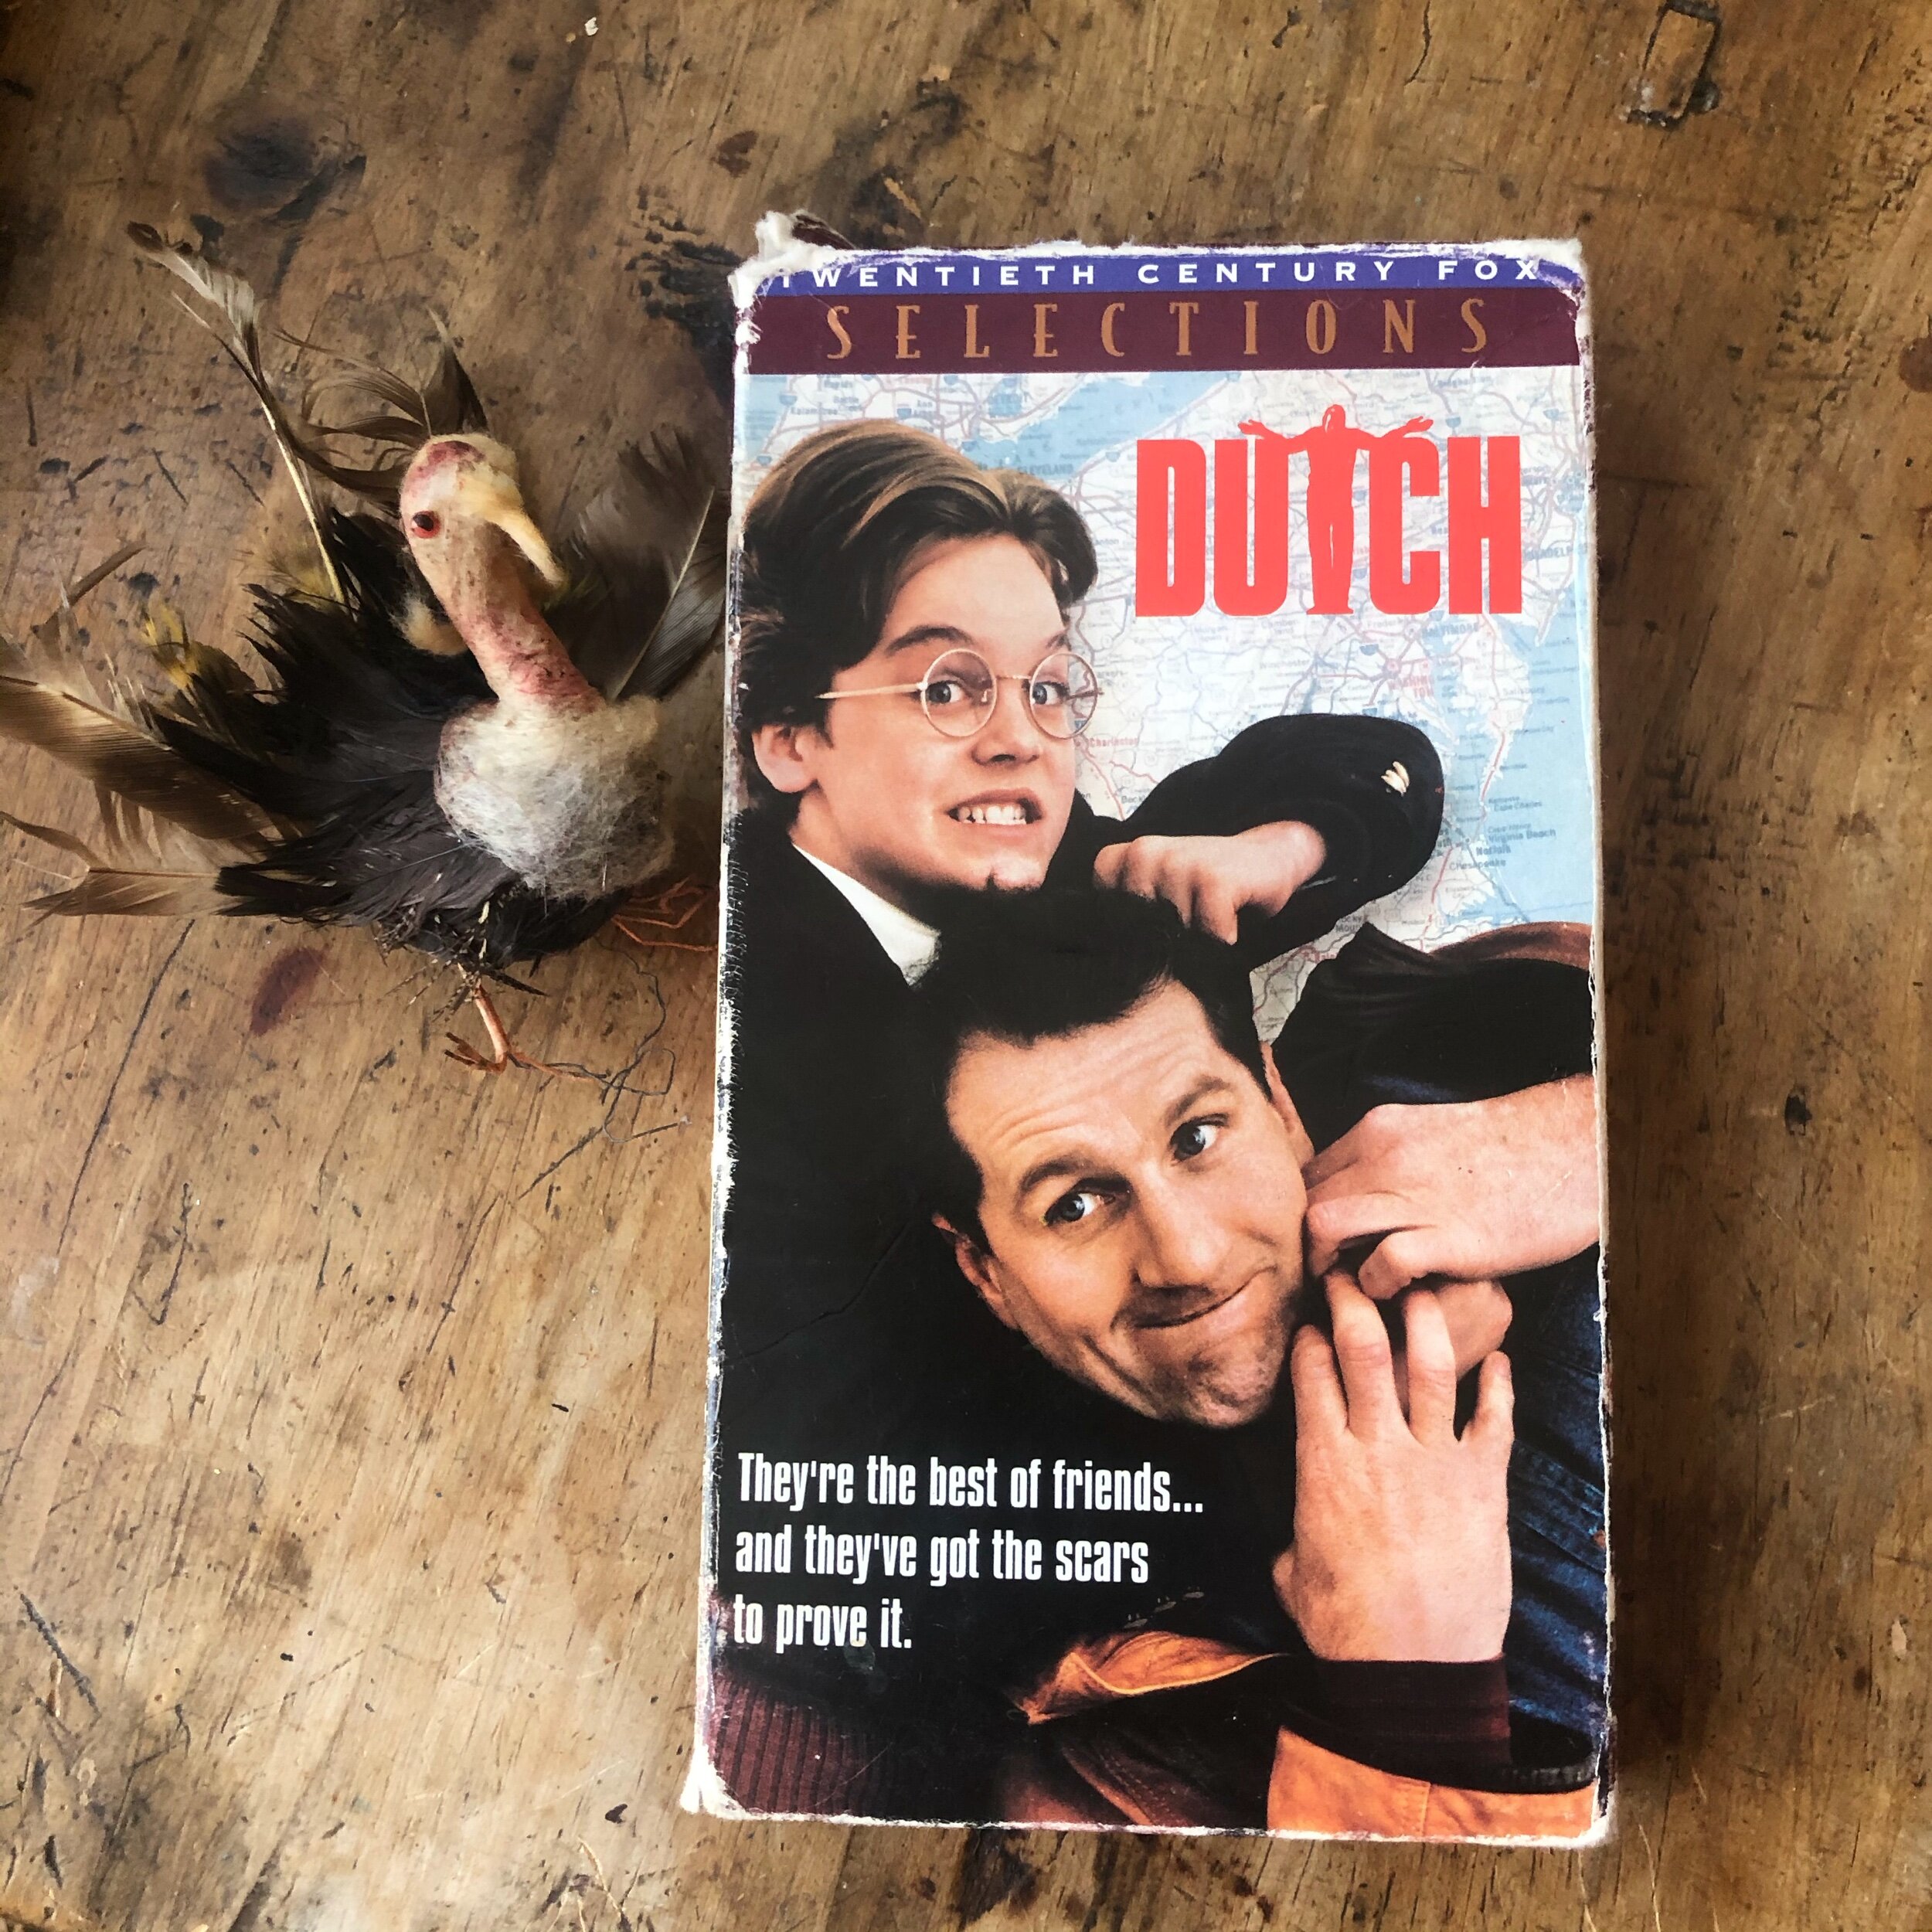 VHS of The week